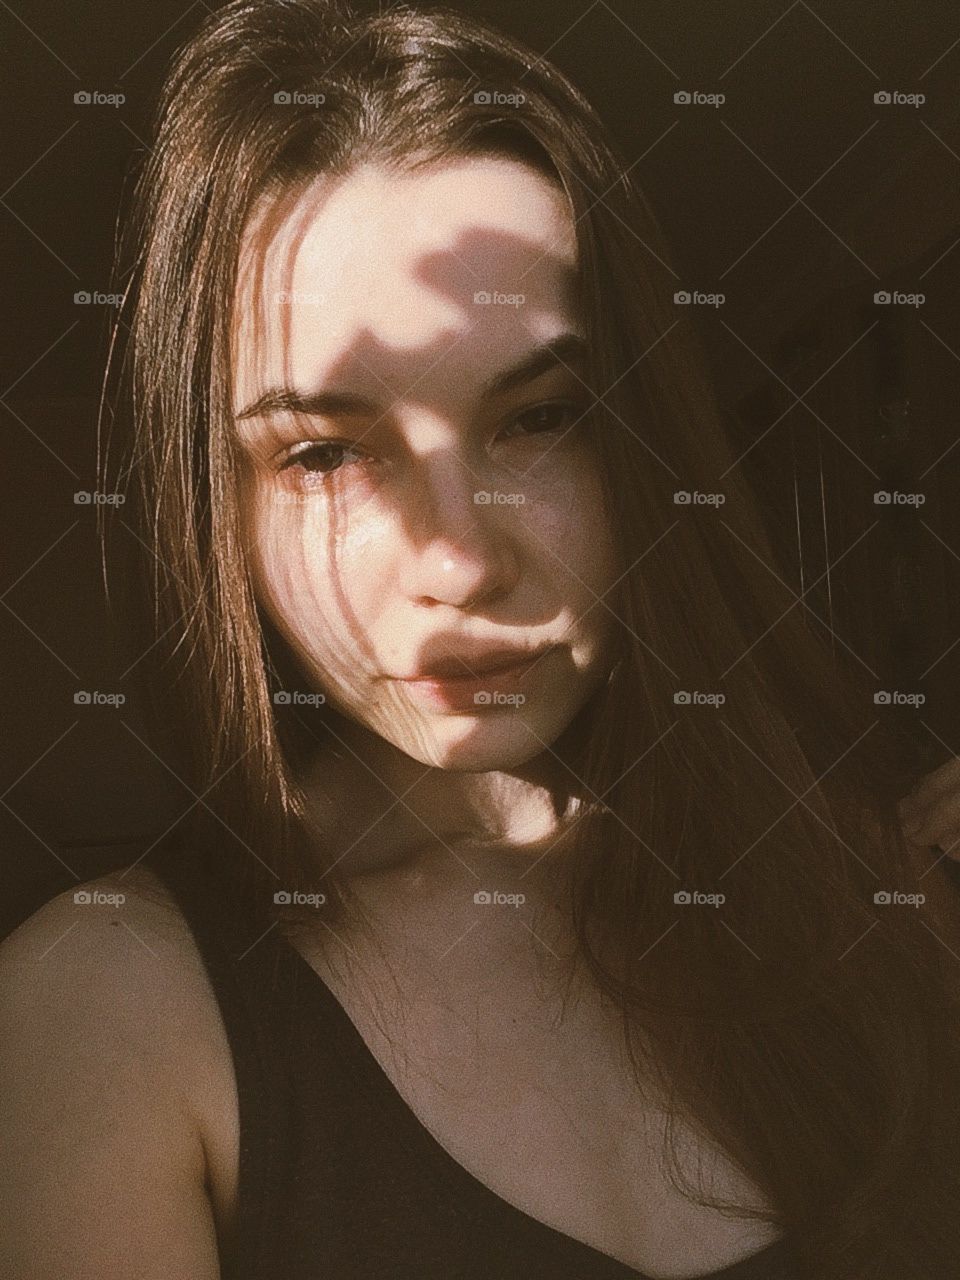 shadows are reflected on the girl's face